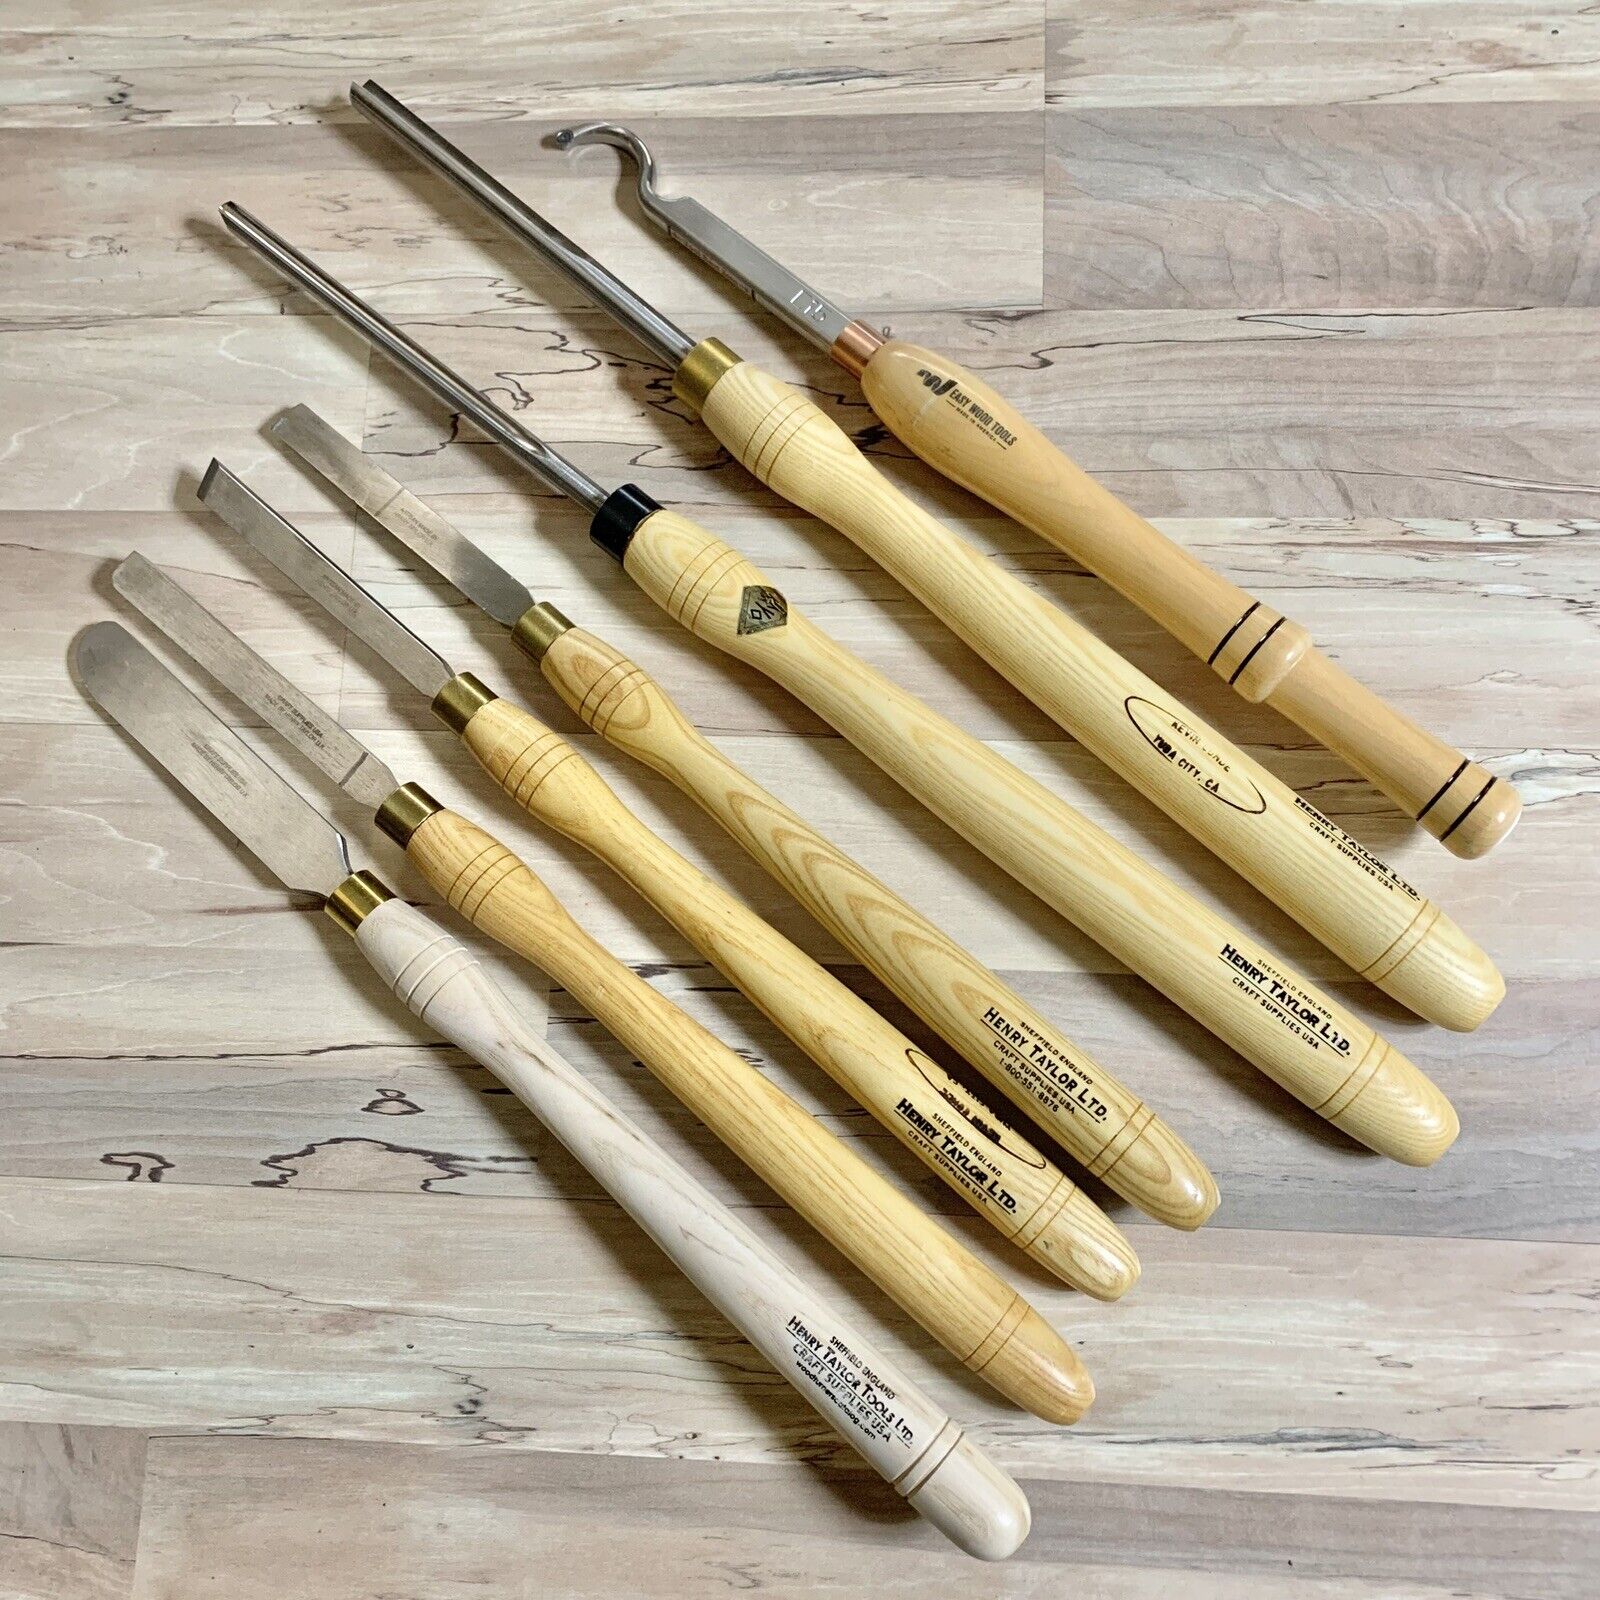 Henry Taylor Wood Turning Carving Chisel Tools Lot Of 6 + 1 Easy Wood Tools